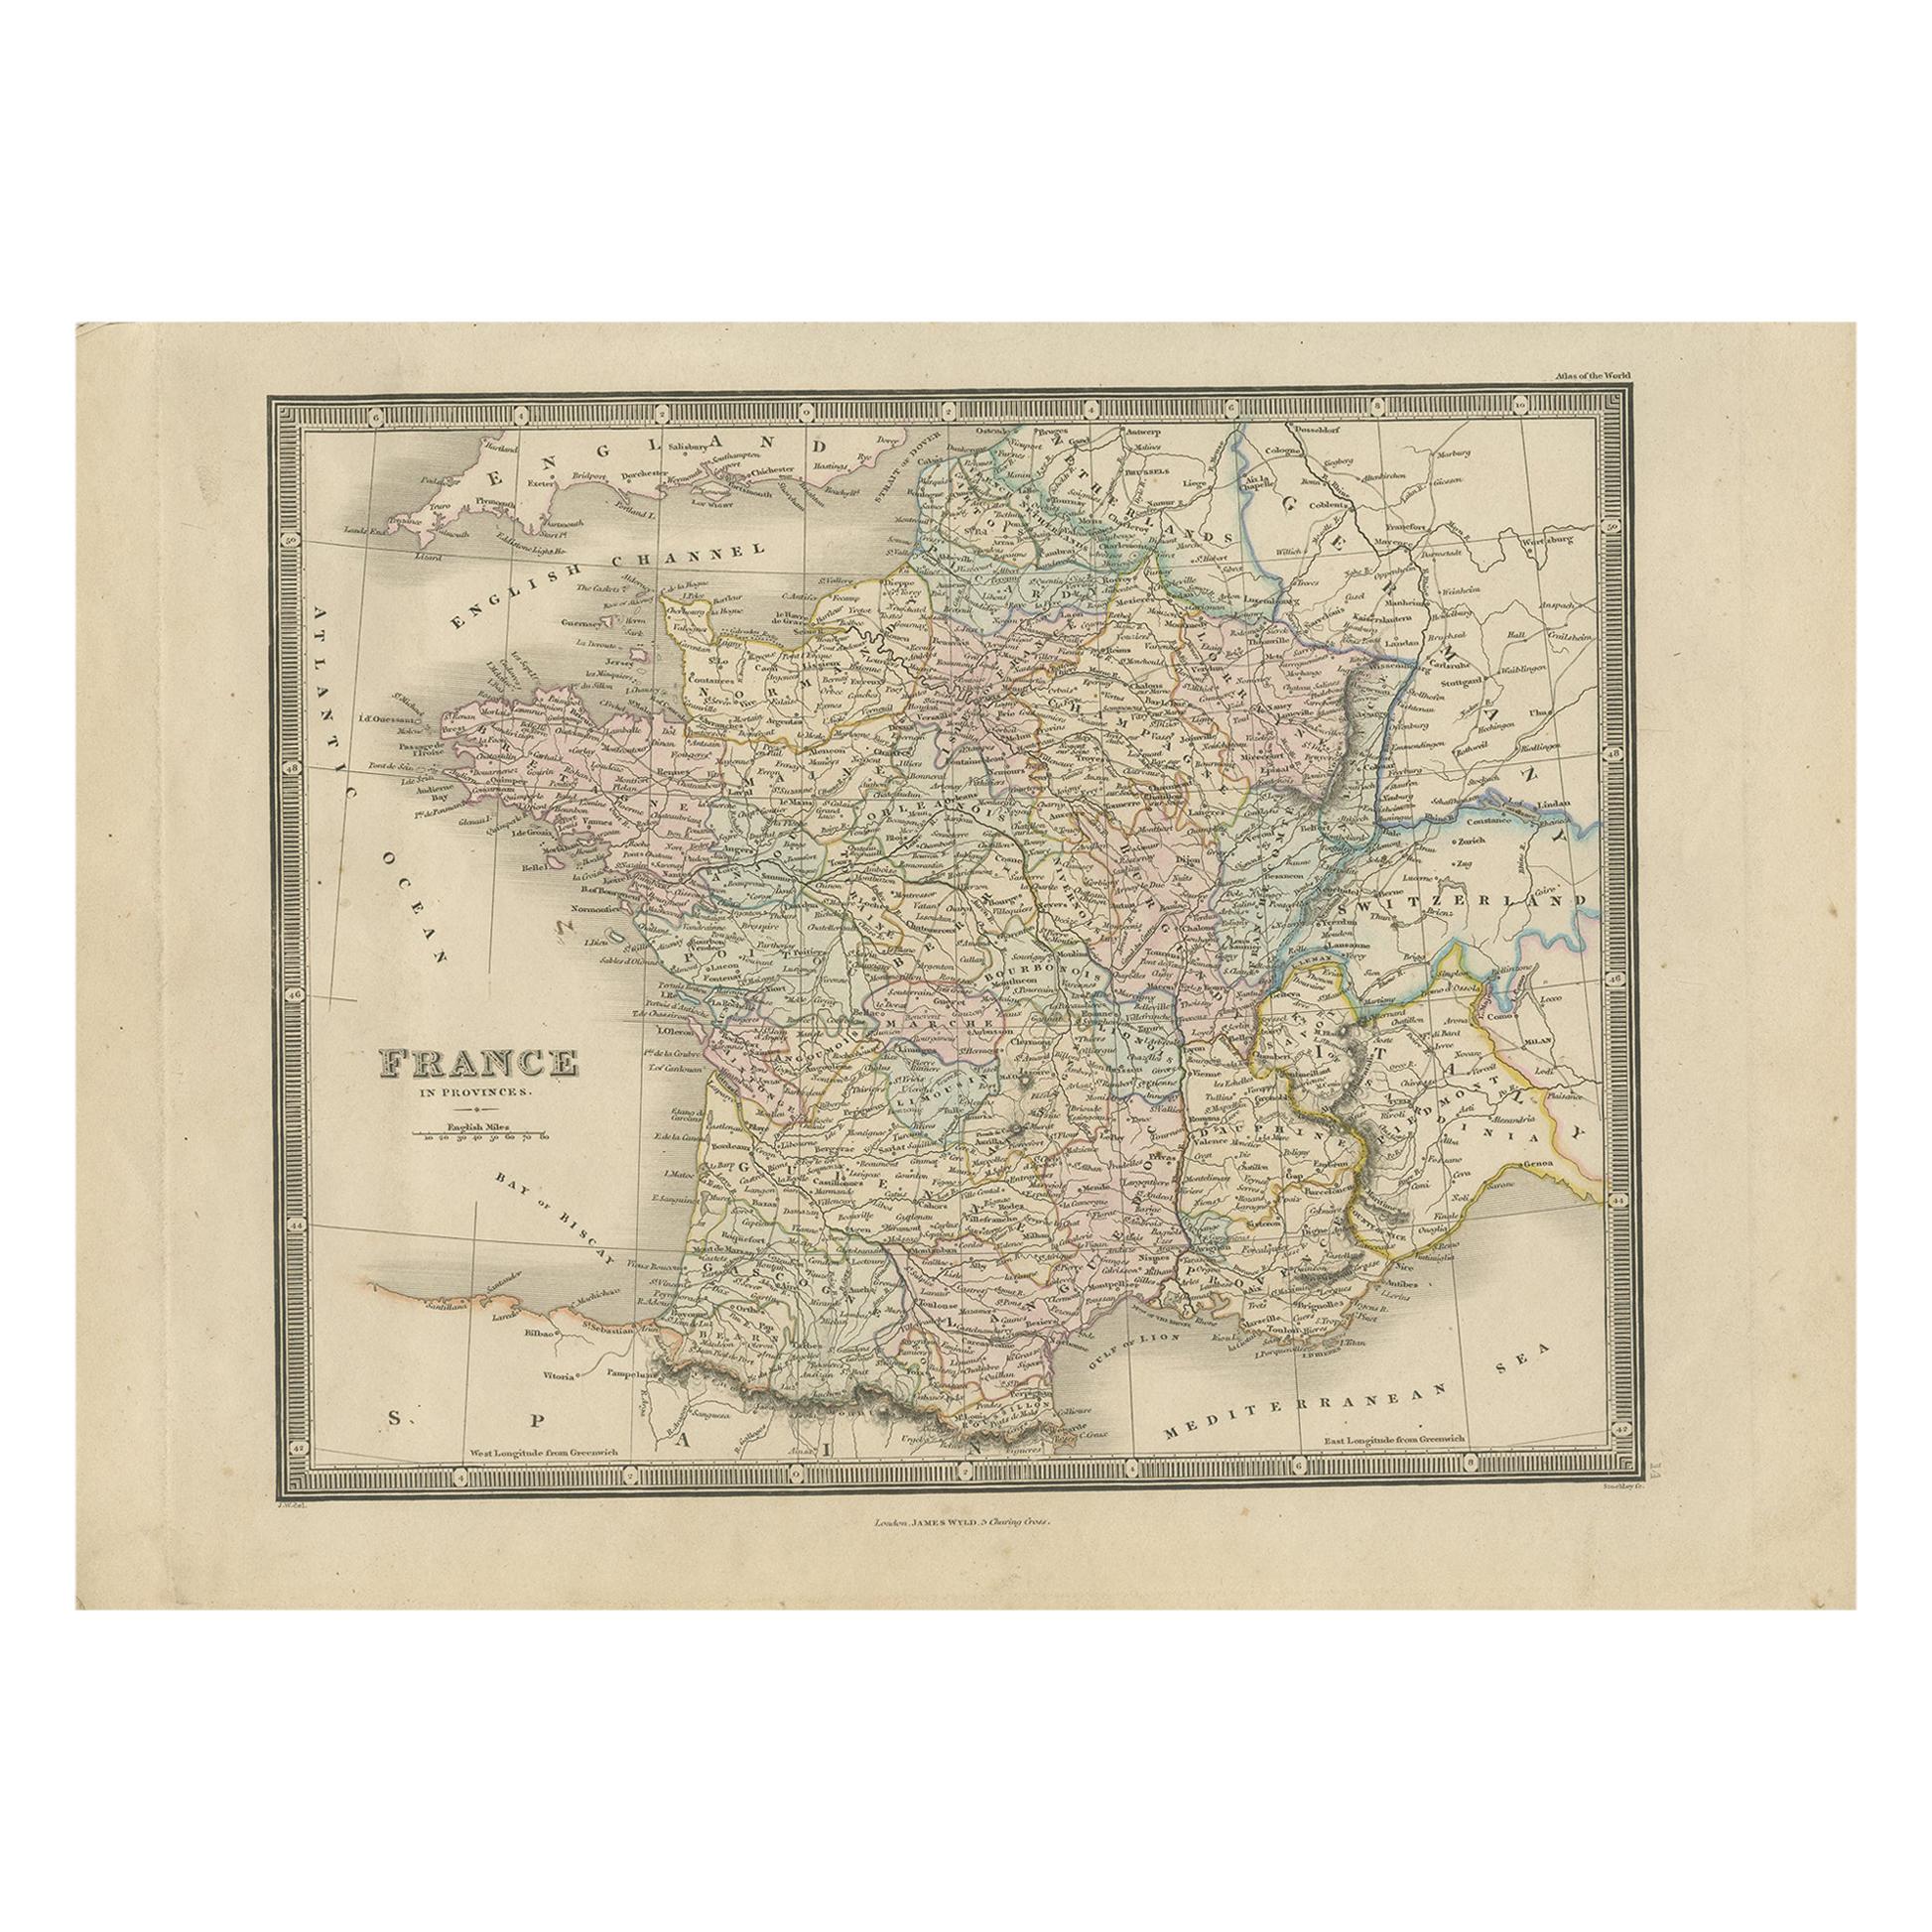 Antique Map of France in Provinces by Wyld, '1845'